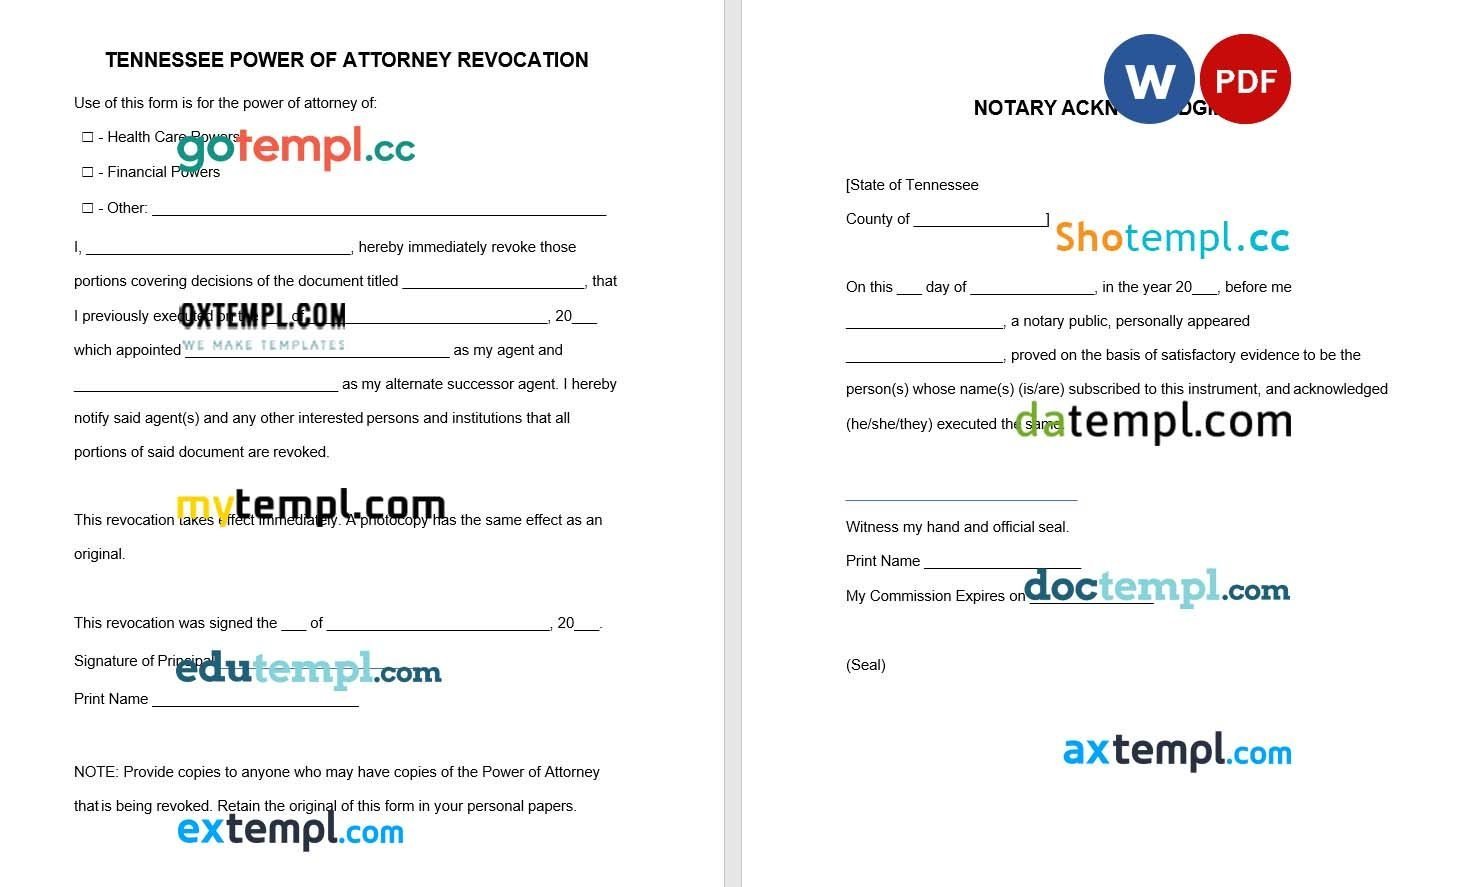 Tennessee Power of Attorney Revocation Form example, fully editable